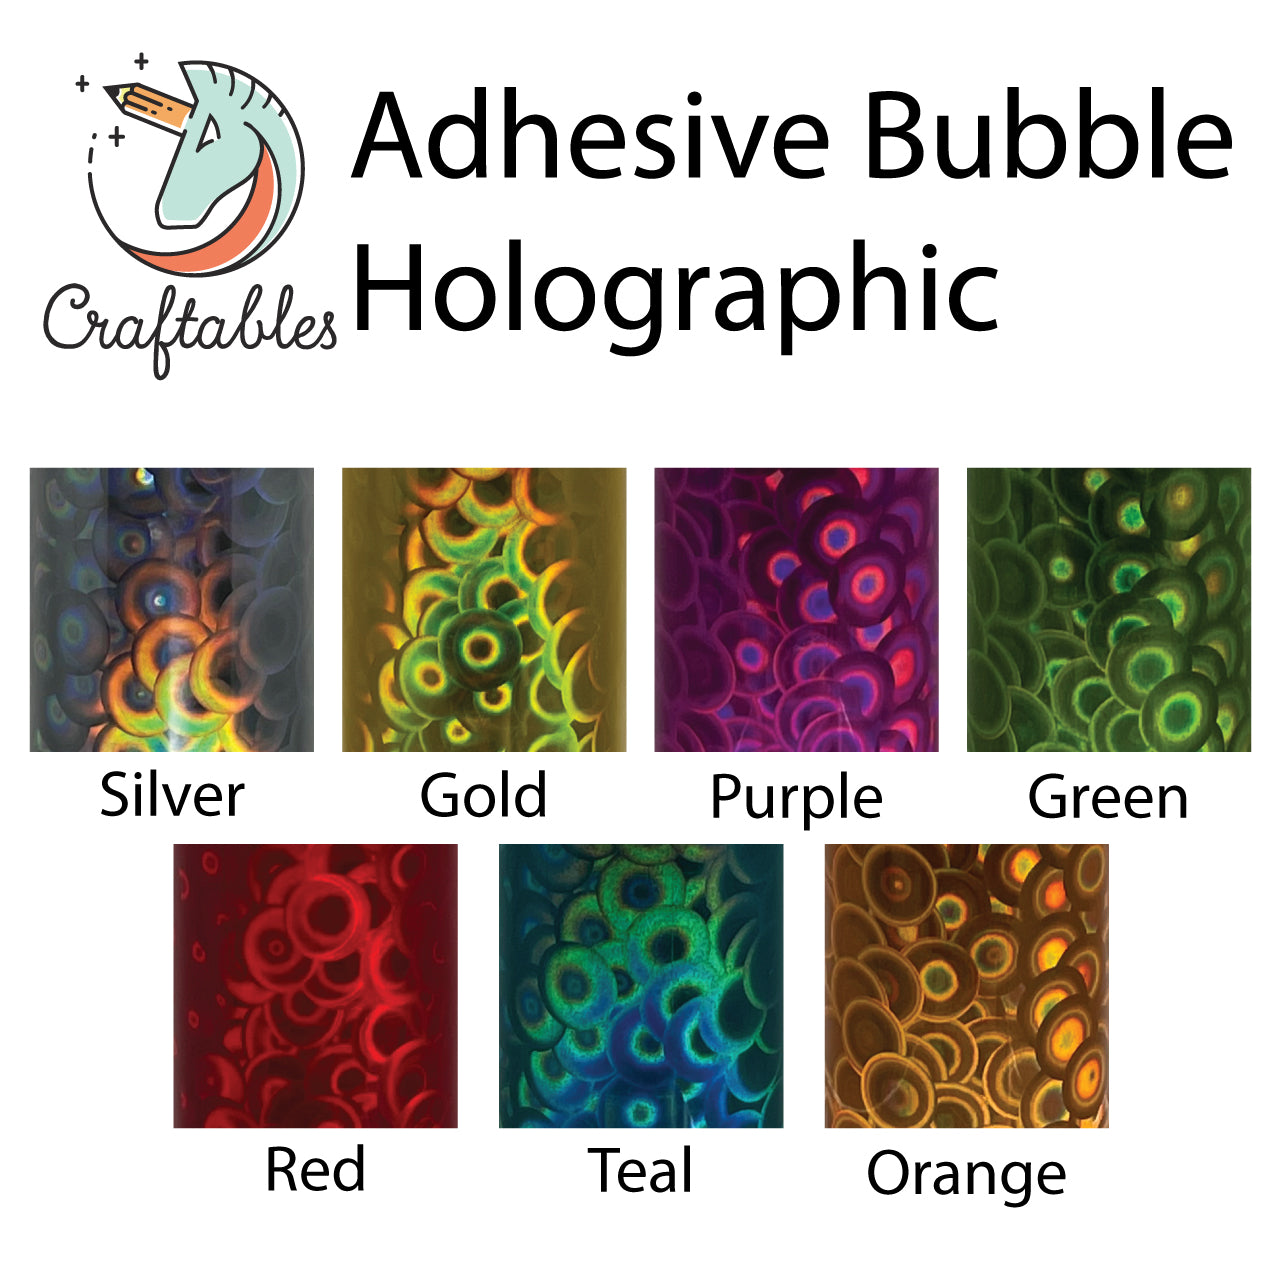 Green Bubble Holographic Adhesive Vinyl Sheets By Craftables